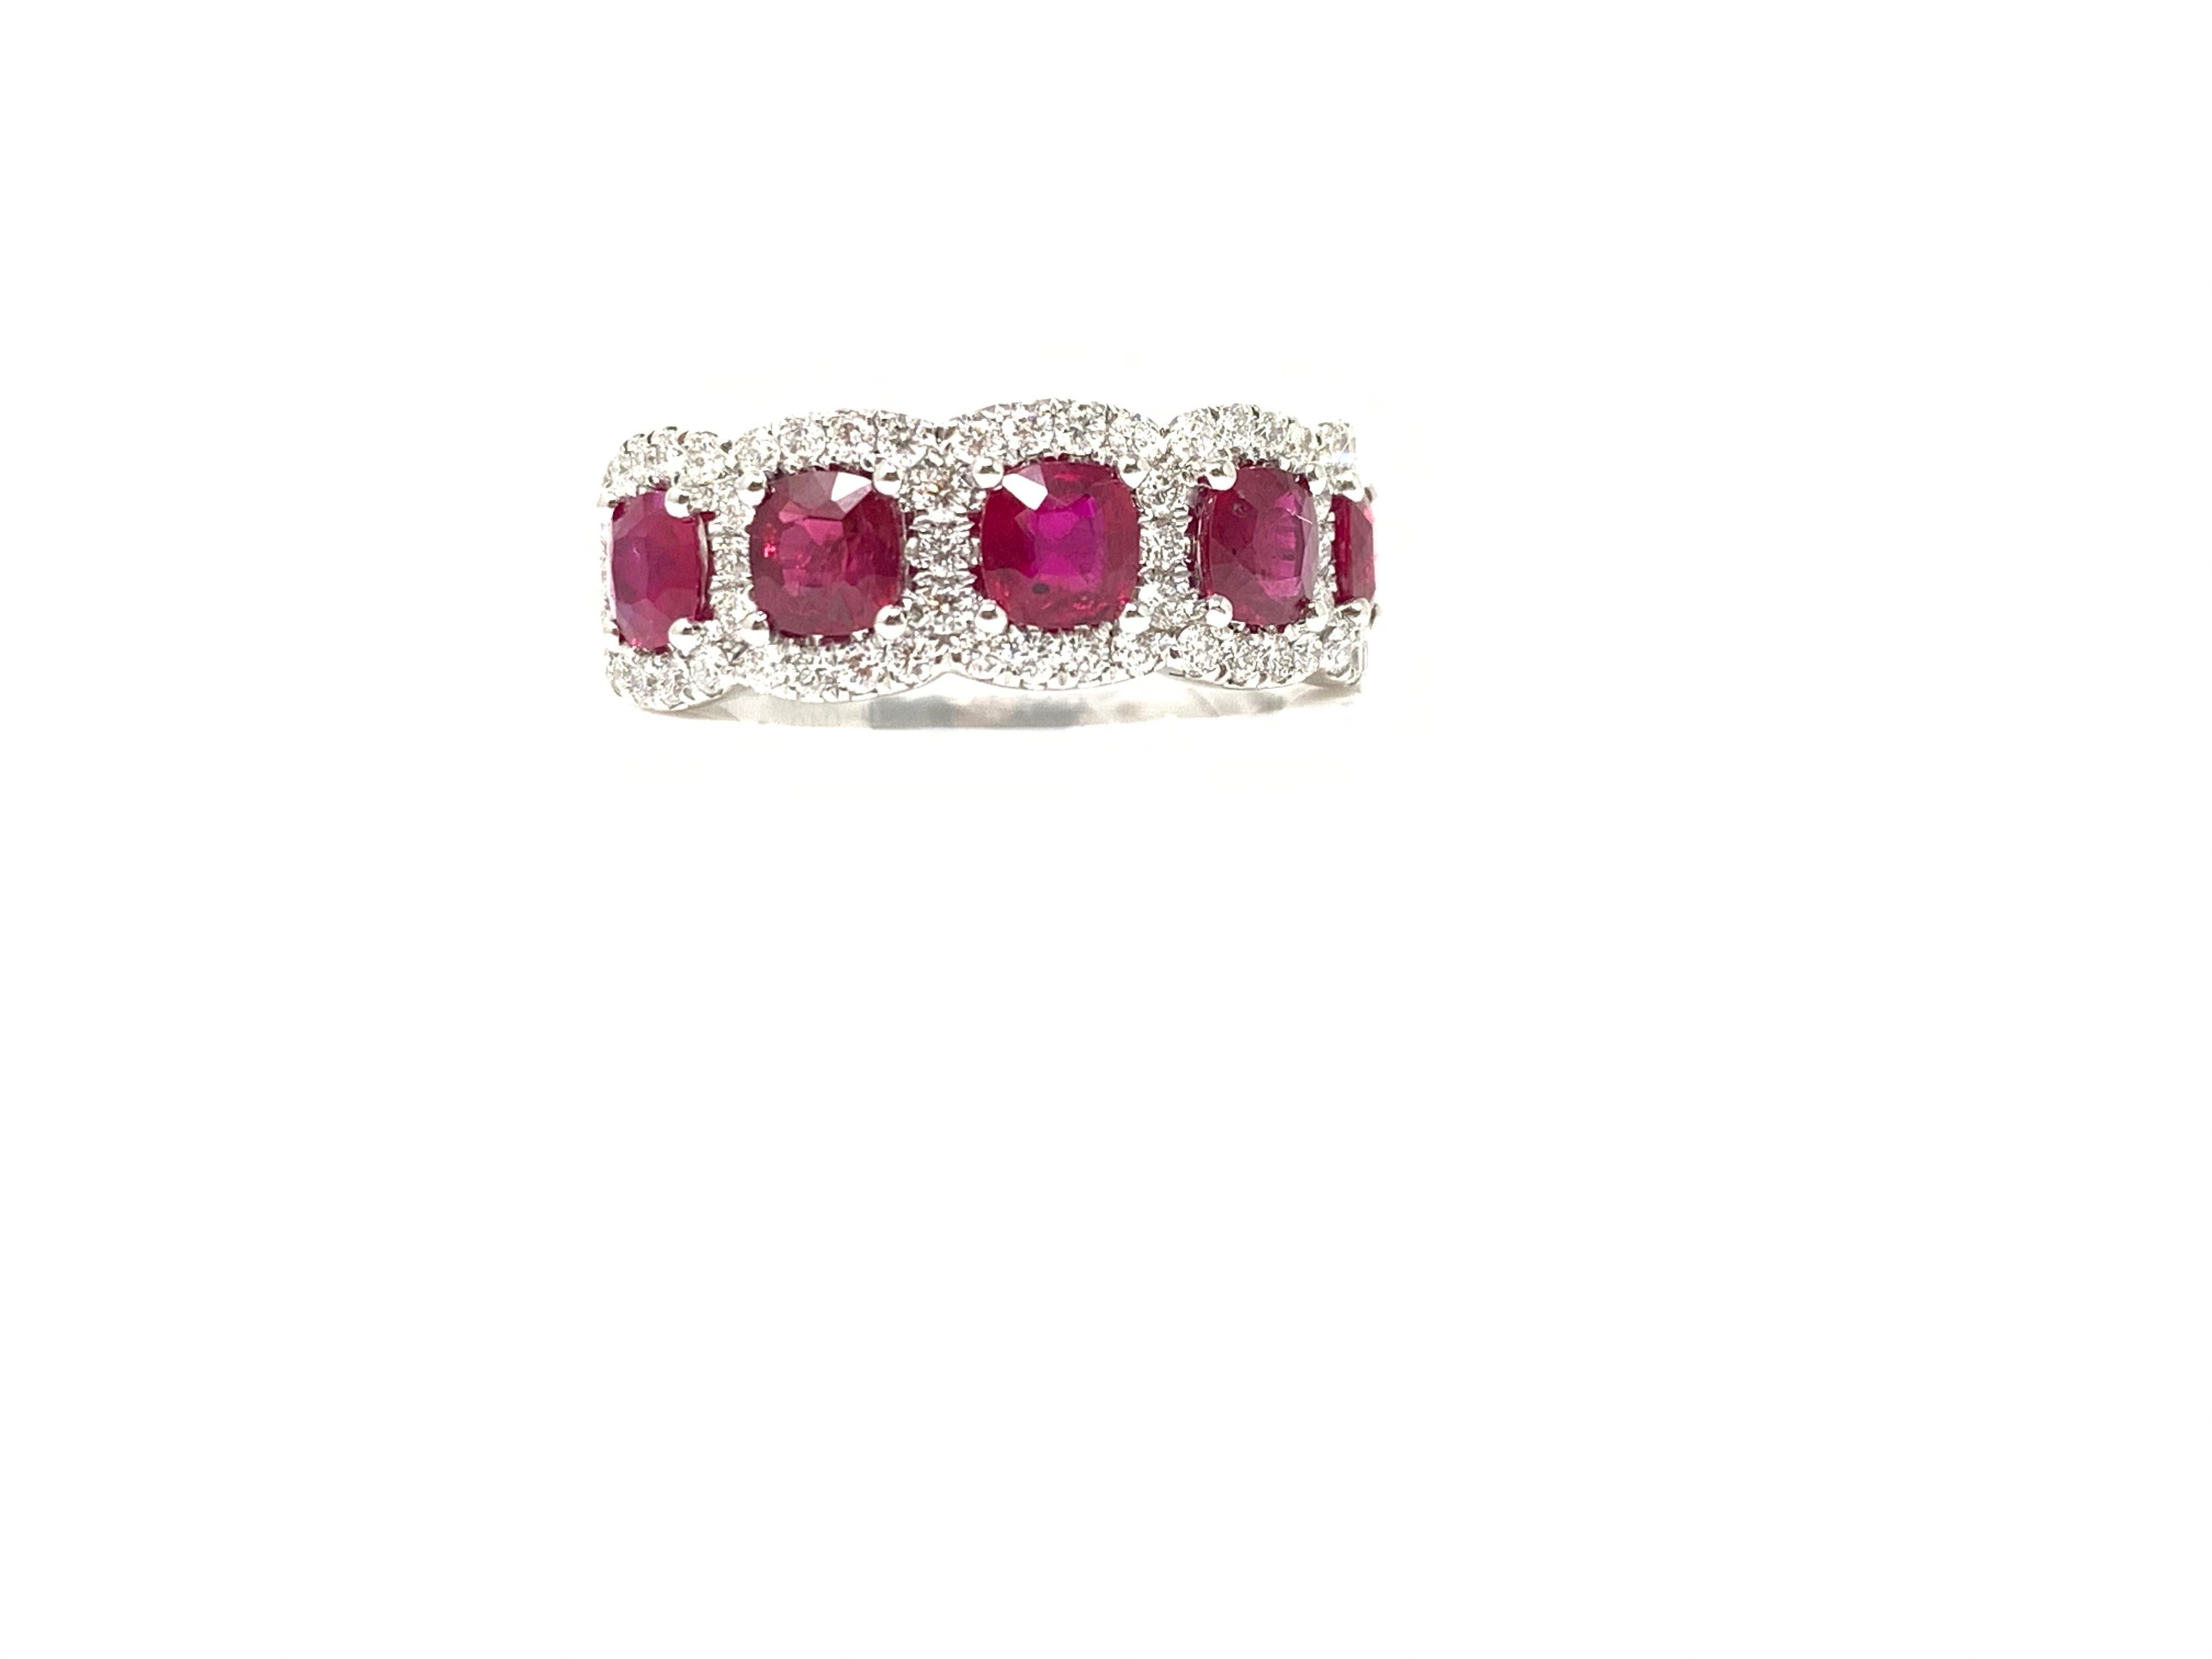 Moguldiam Inc  ruby and diamond wedding band is beautifully hand made in 18k white gold.
The details are as follows : 
Ruby : 1.55 carat 
Diamond : 0.49 carat 
Metal : 18k white gold 
Ring size : 6 1/2 